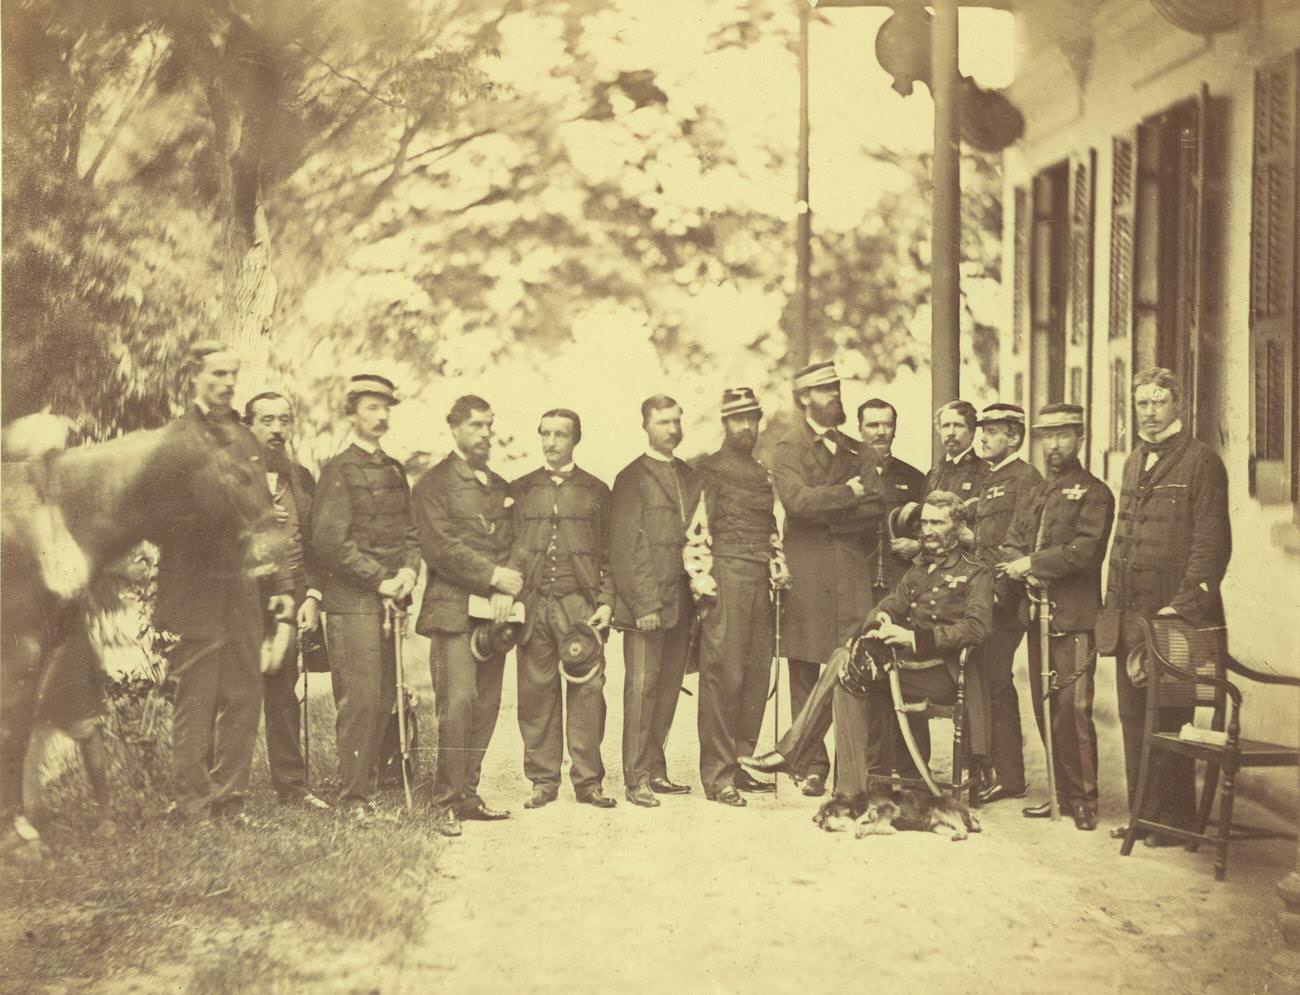 British officer Garnet Joseph Wolseley with Sir Hope Grant and staff in the Anglo-French expedition in China, 1860.